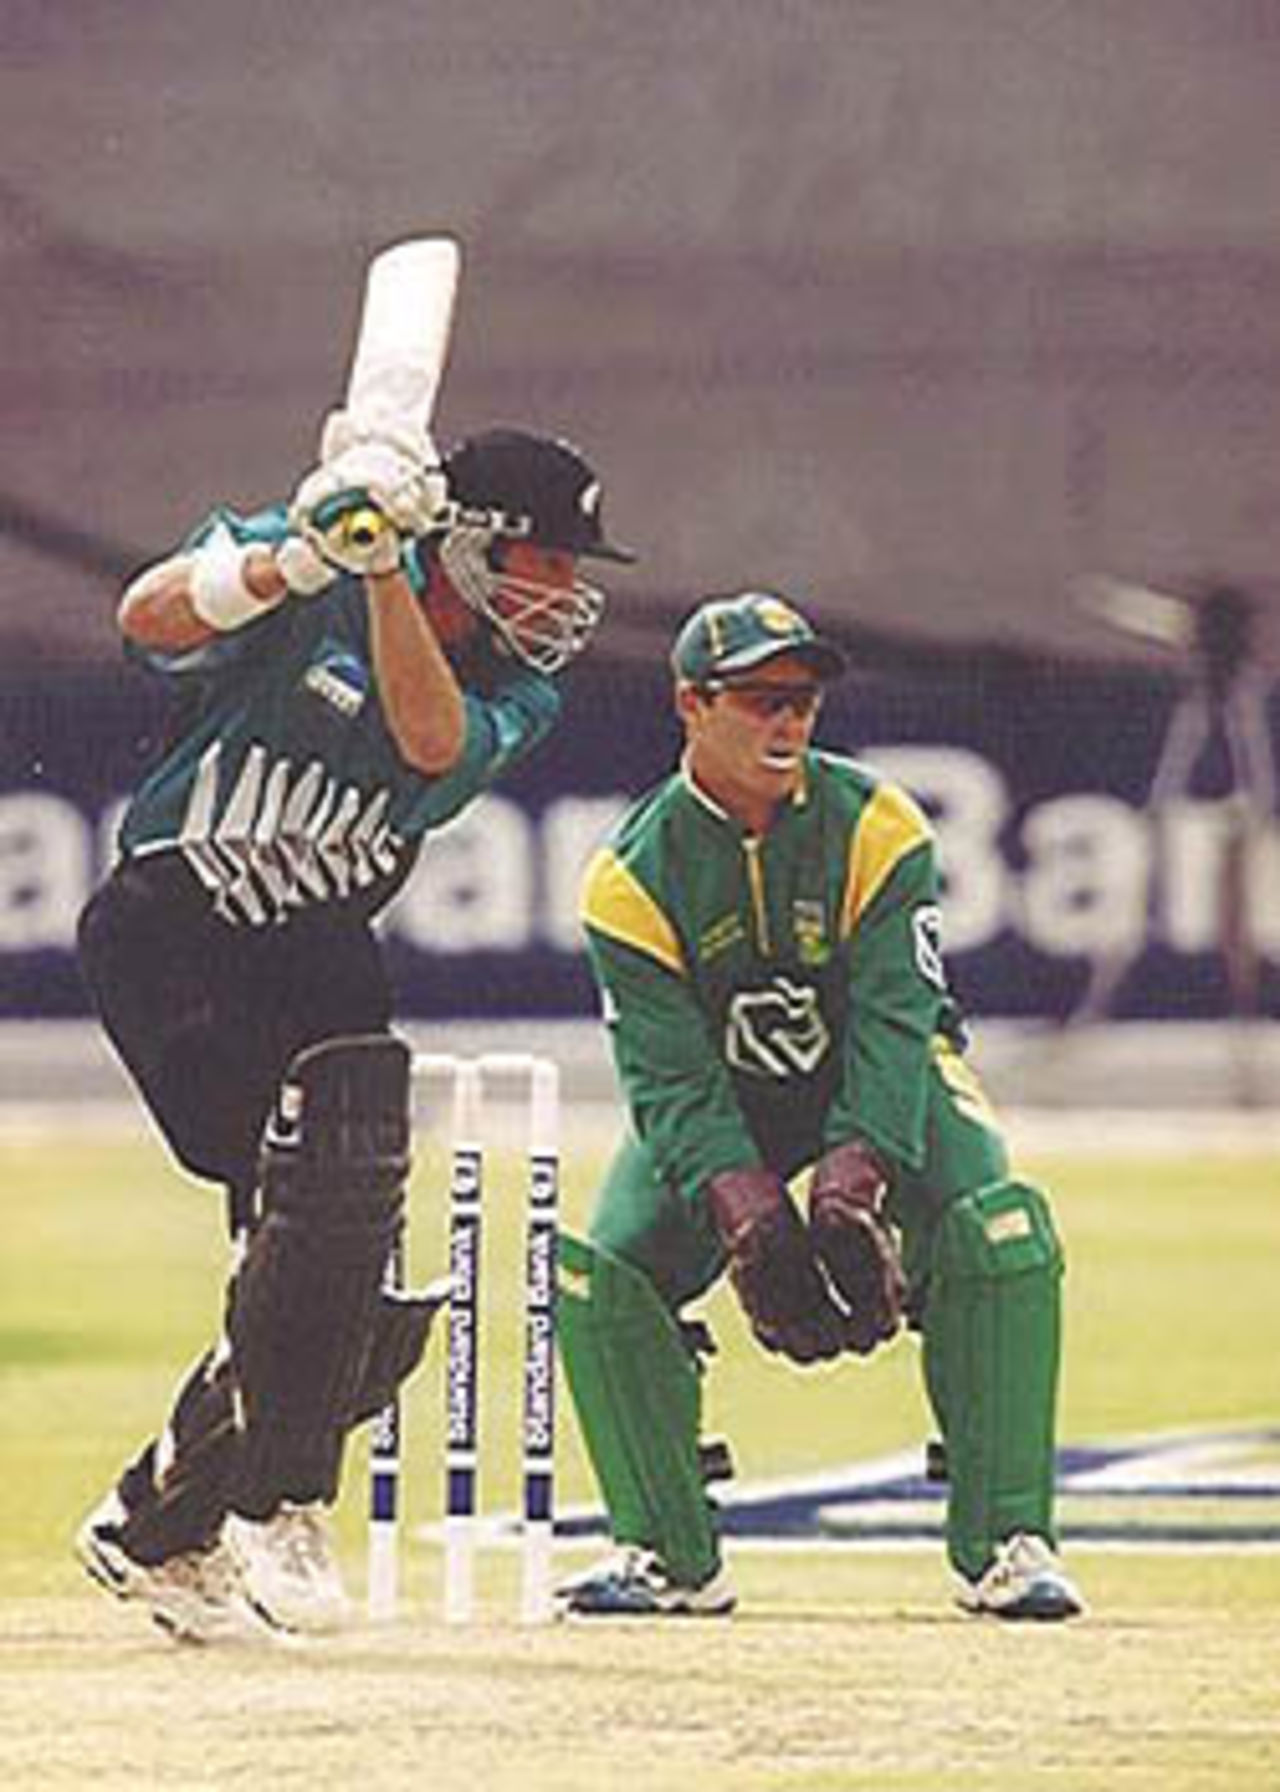 Chris Harris drives as Boucher looks on, New Zealand in South Africa 2000/01, 2nd One-Day International, South Africa v New Zealand, Willowmoore Park, Benoni, 22 October 2000.